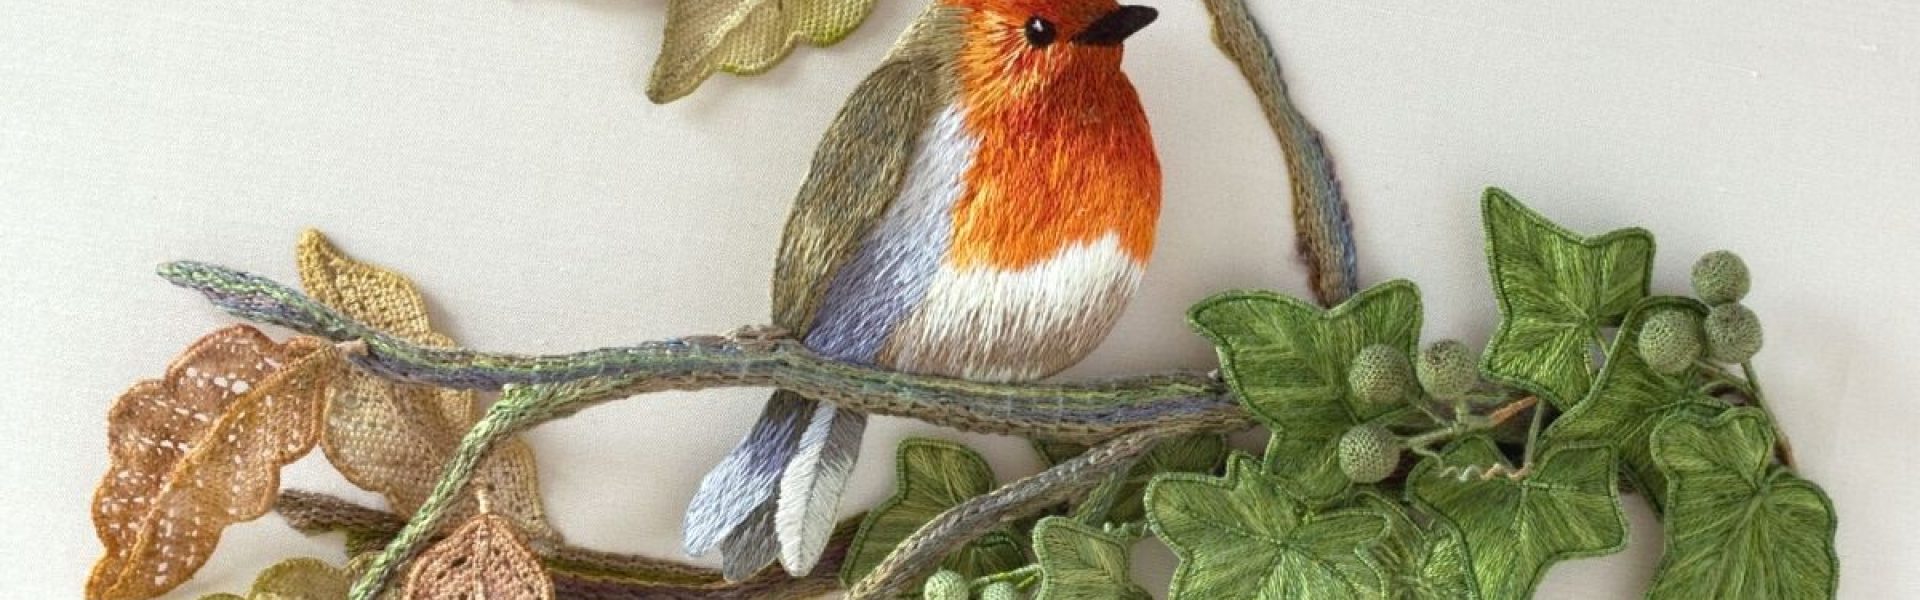 Interview with Kay Dennis Stumpwork Embroidery Artist.